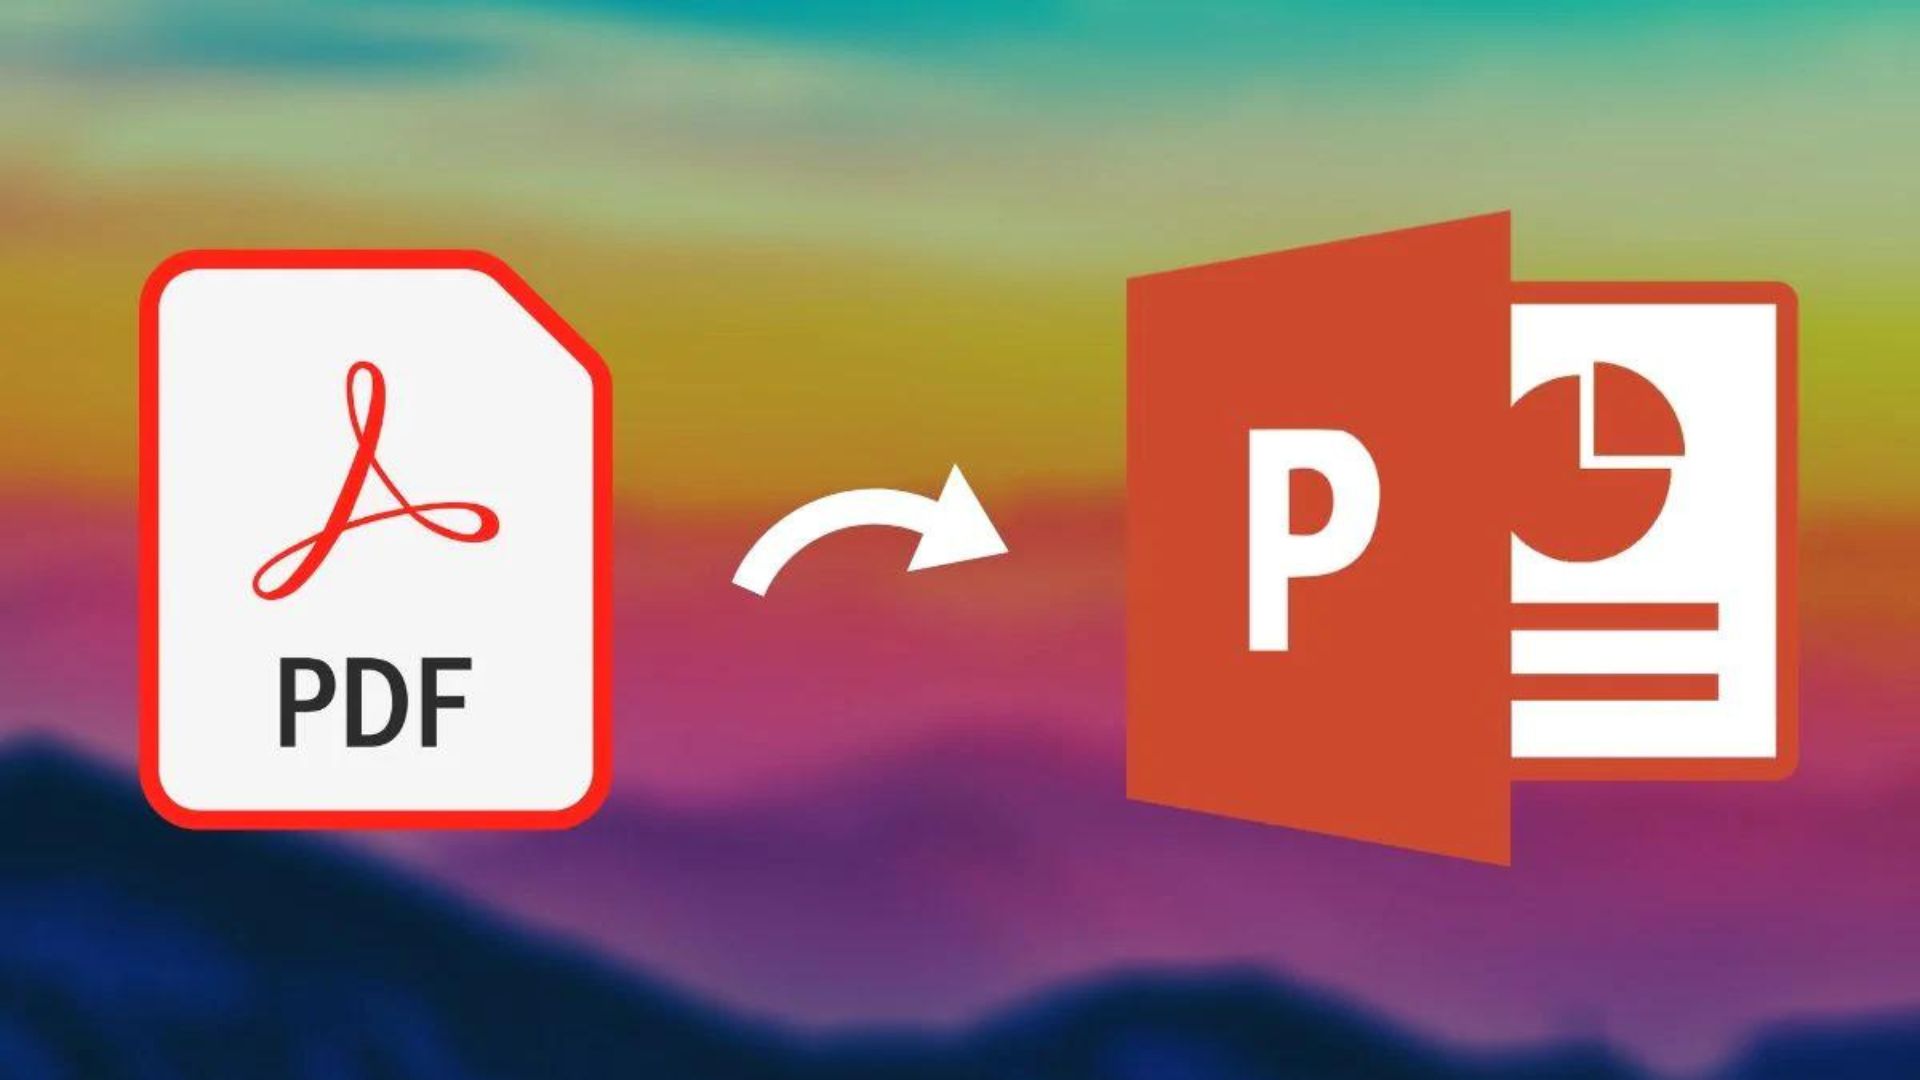 this image shows how to convert PDFs to PowerPoint